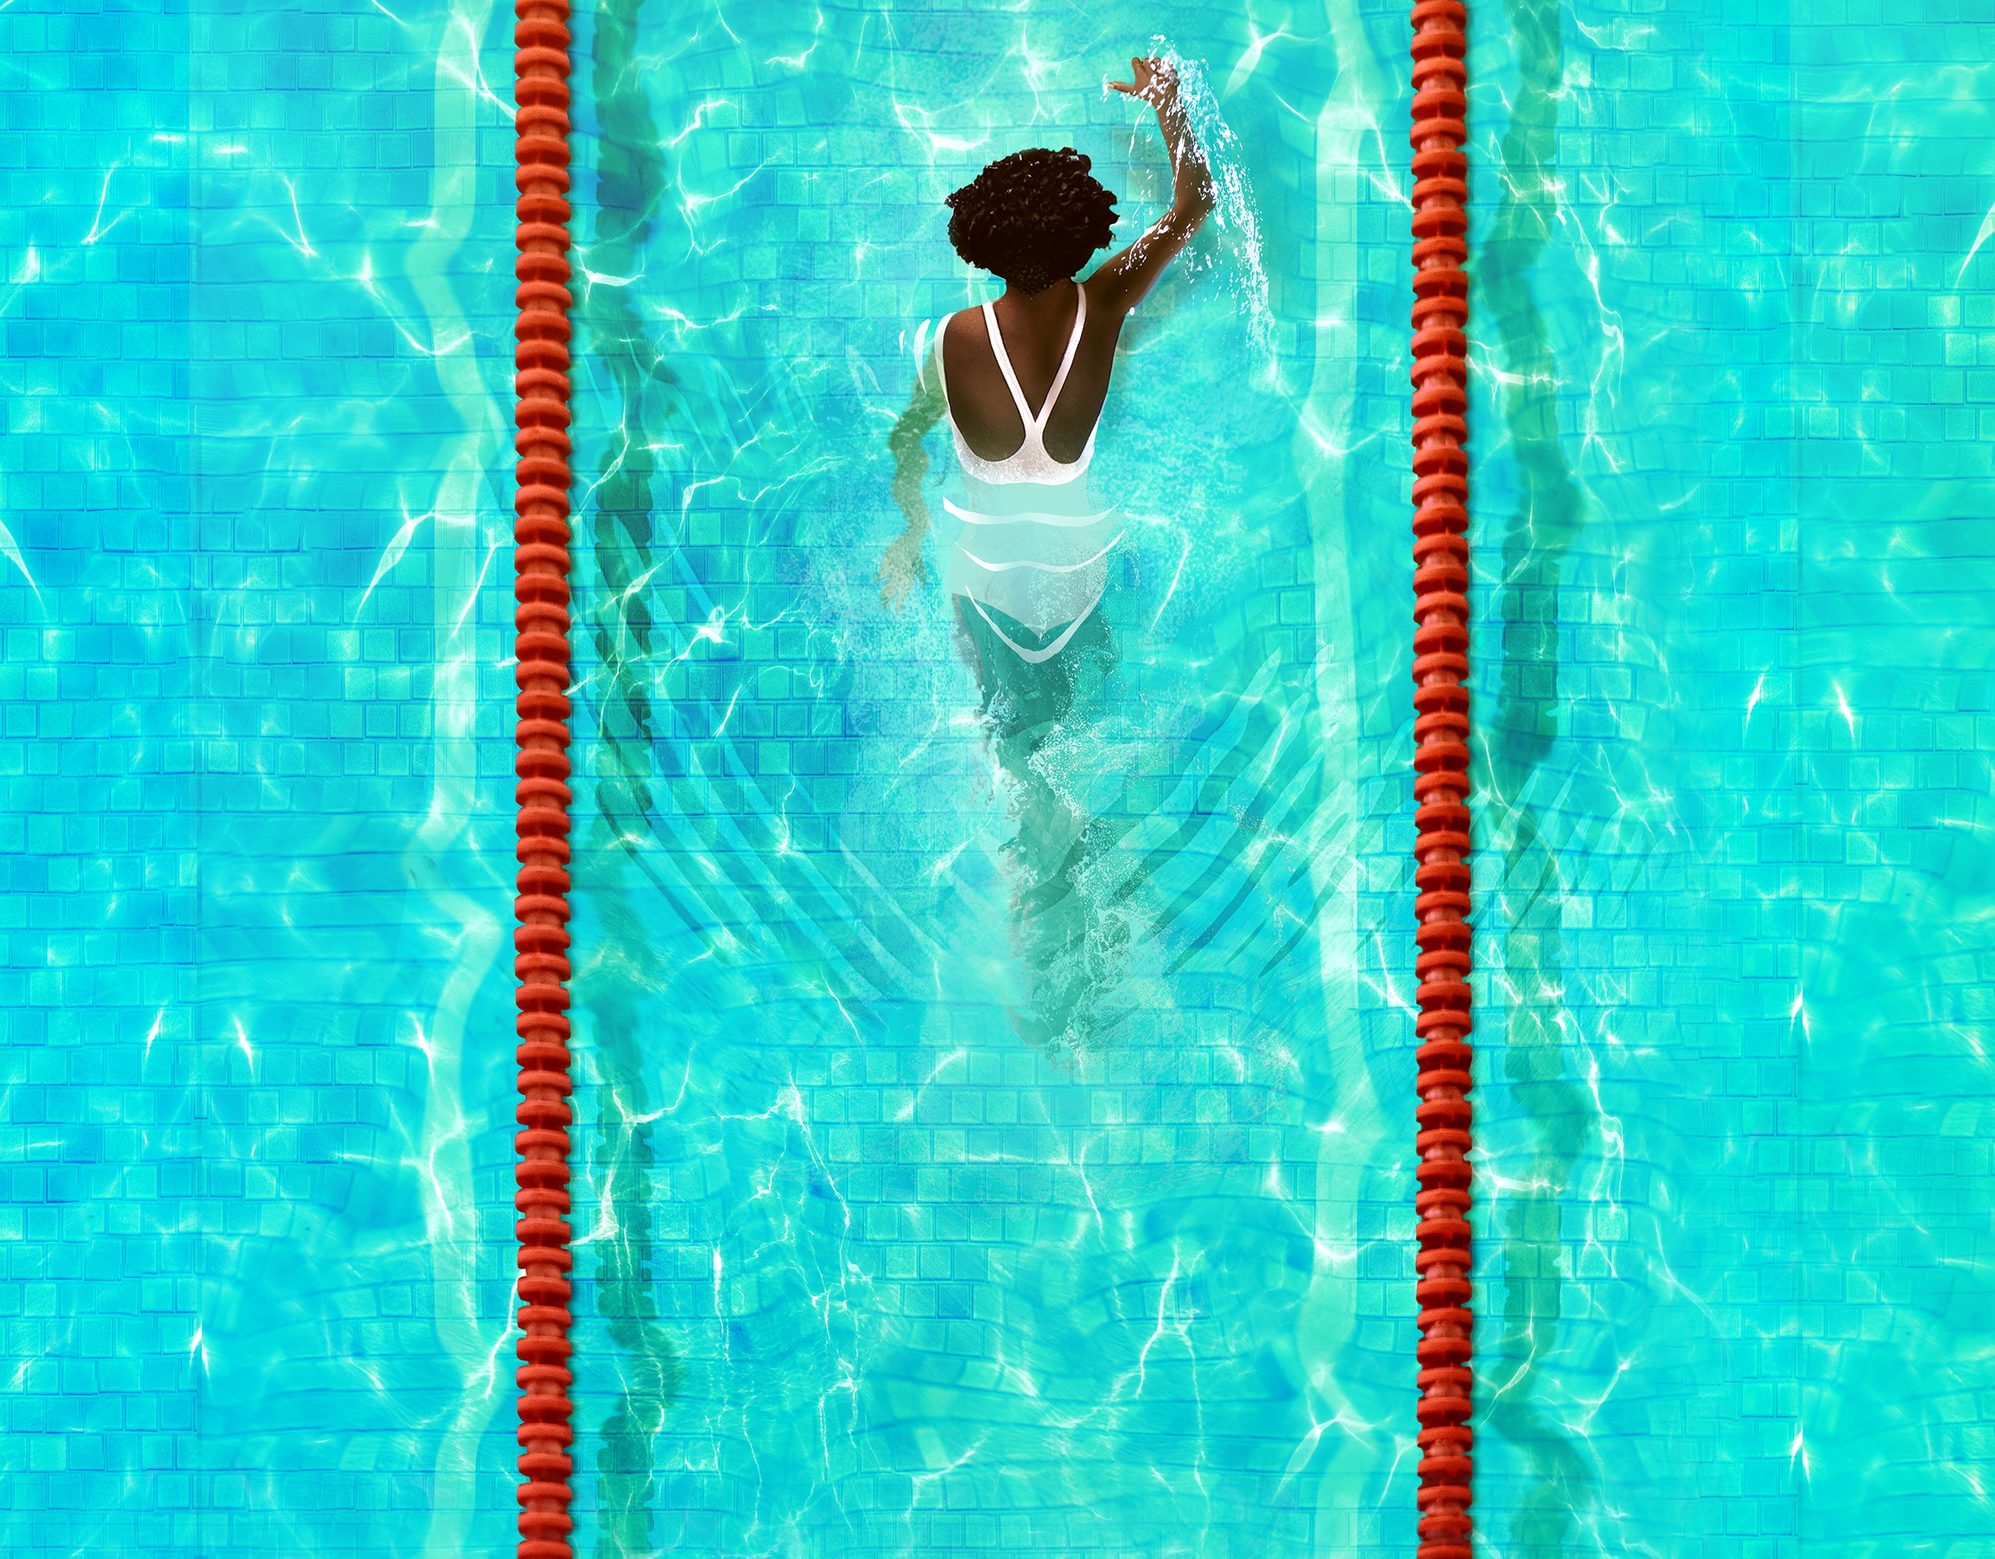 the ripple, the wave that carried me home - Girl swimming in pool